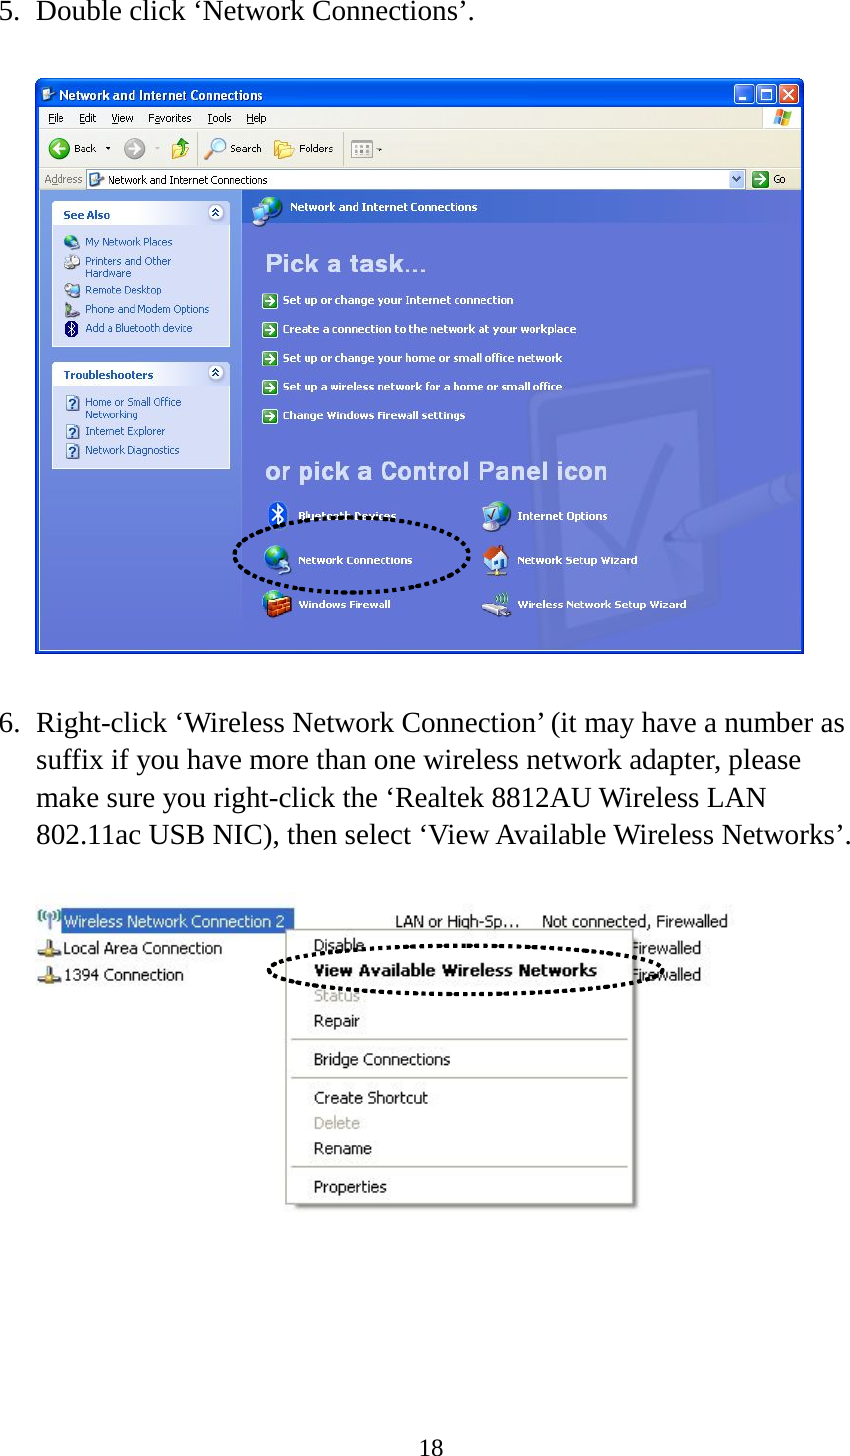 18  5. Double click ‘Network Connections’.    6. Right-click ‘Wireless Network Connection’ (it may have a number as suffix if you have more than one wireless network adapter, please make sure you right-click the ‘Realtek 8812AU Wireless LAN 802.11ac USB NIC), then select ‘View Available Wireless Networks’.        